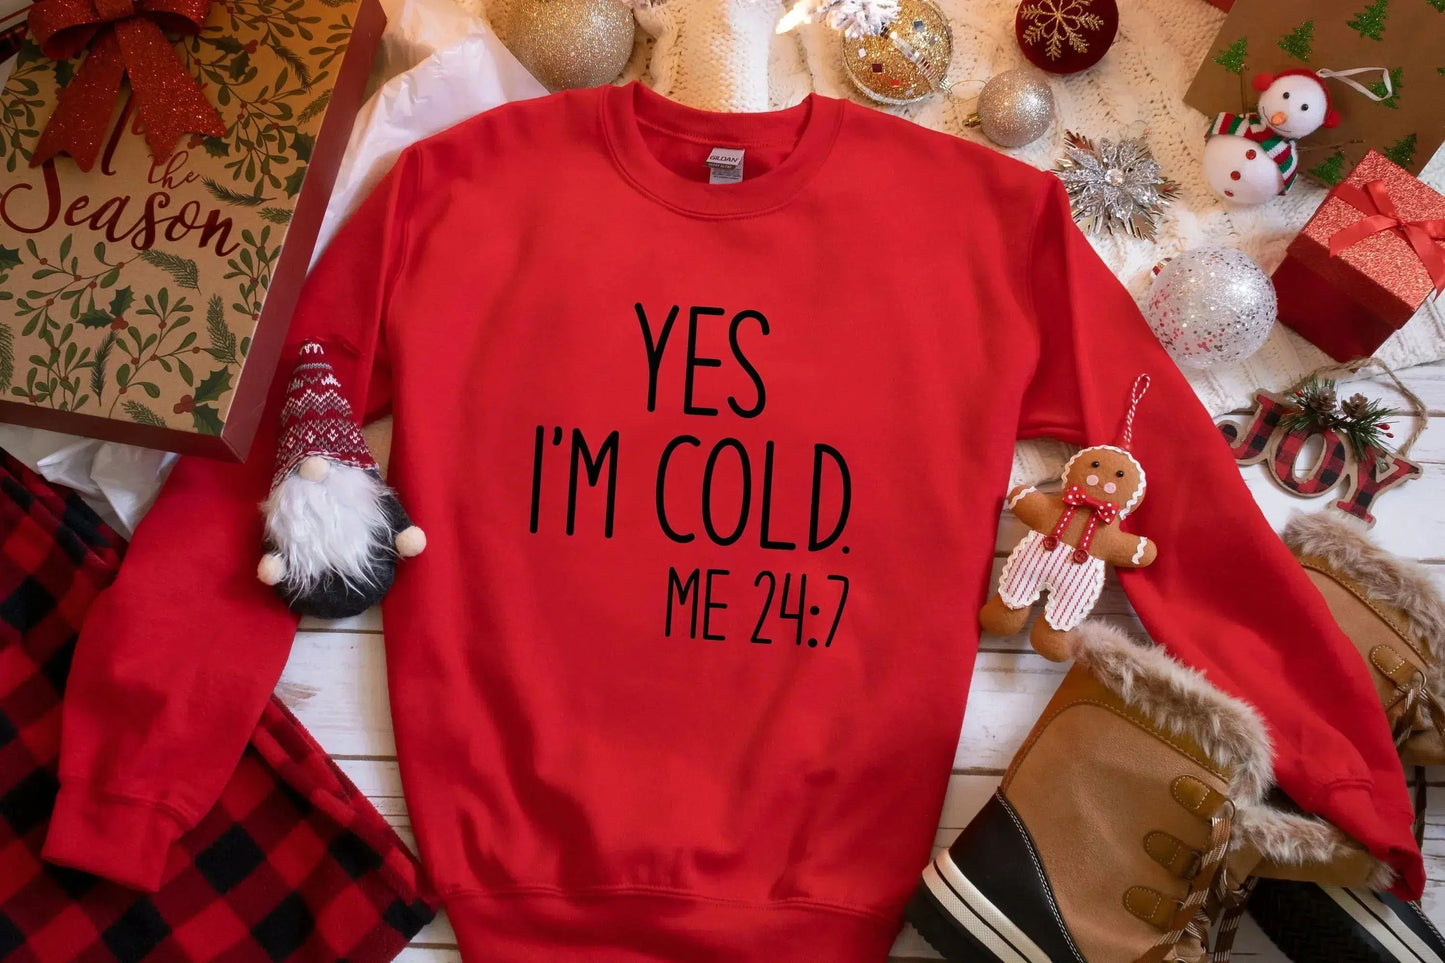 I'm Cold 24/7, Christmas T-shirt for Women, Funny Winter Shirt, Christmas Tee, Holiday Shirt, Women's Christmas, Holiday Shirt HMDesignStudioUS